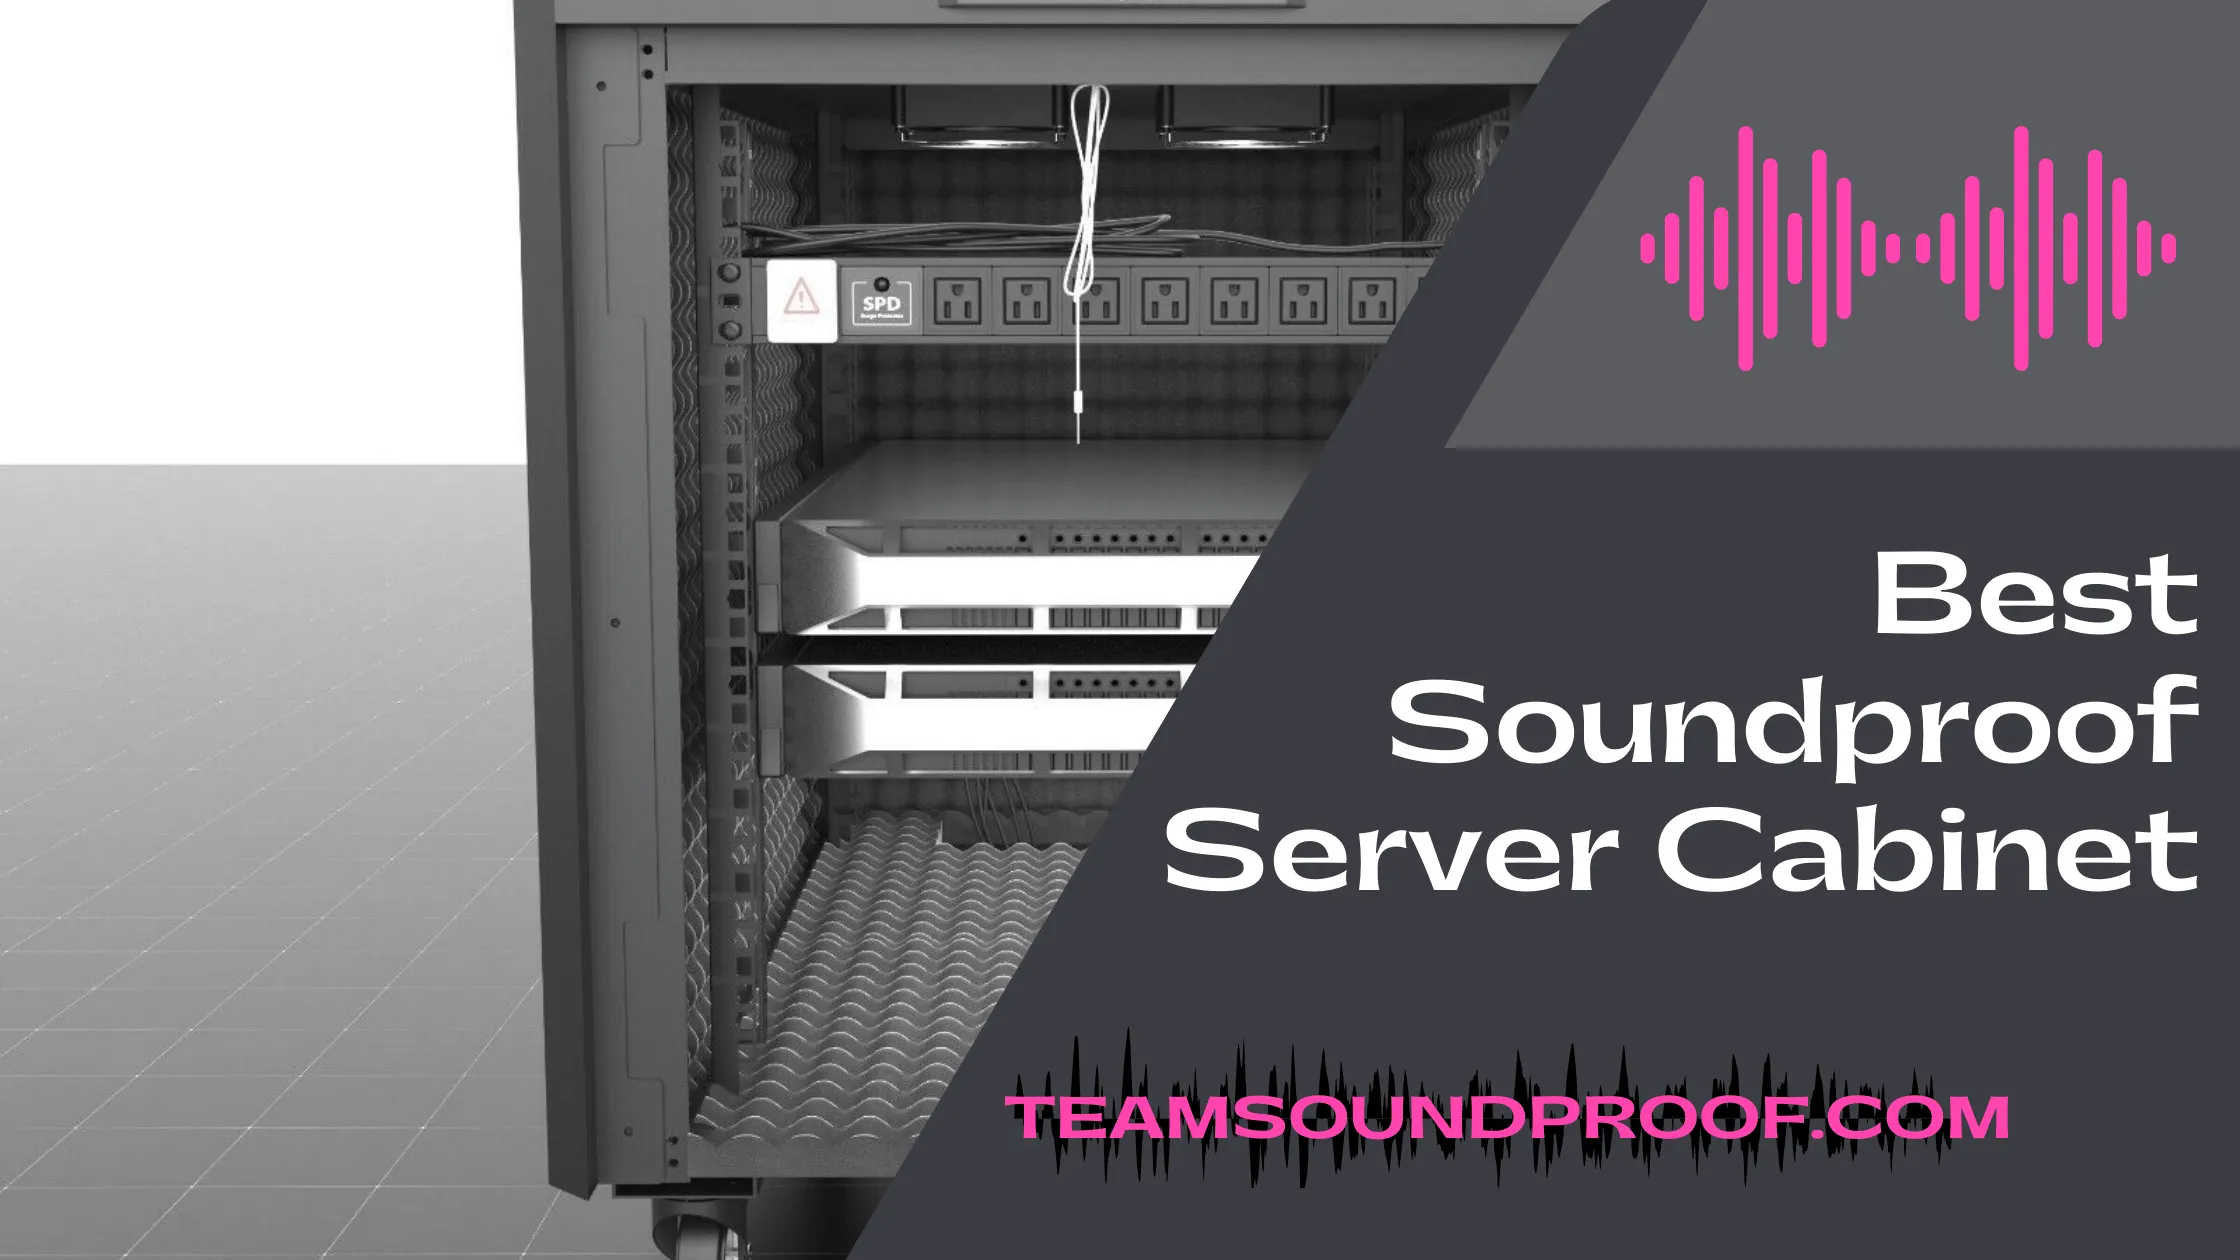 Best Soundproof Server Cabinet - Latest Guide